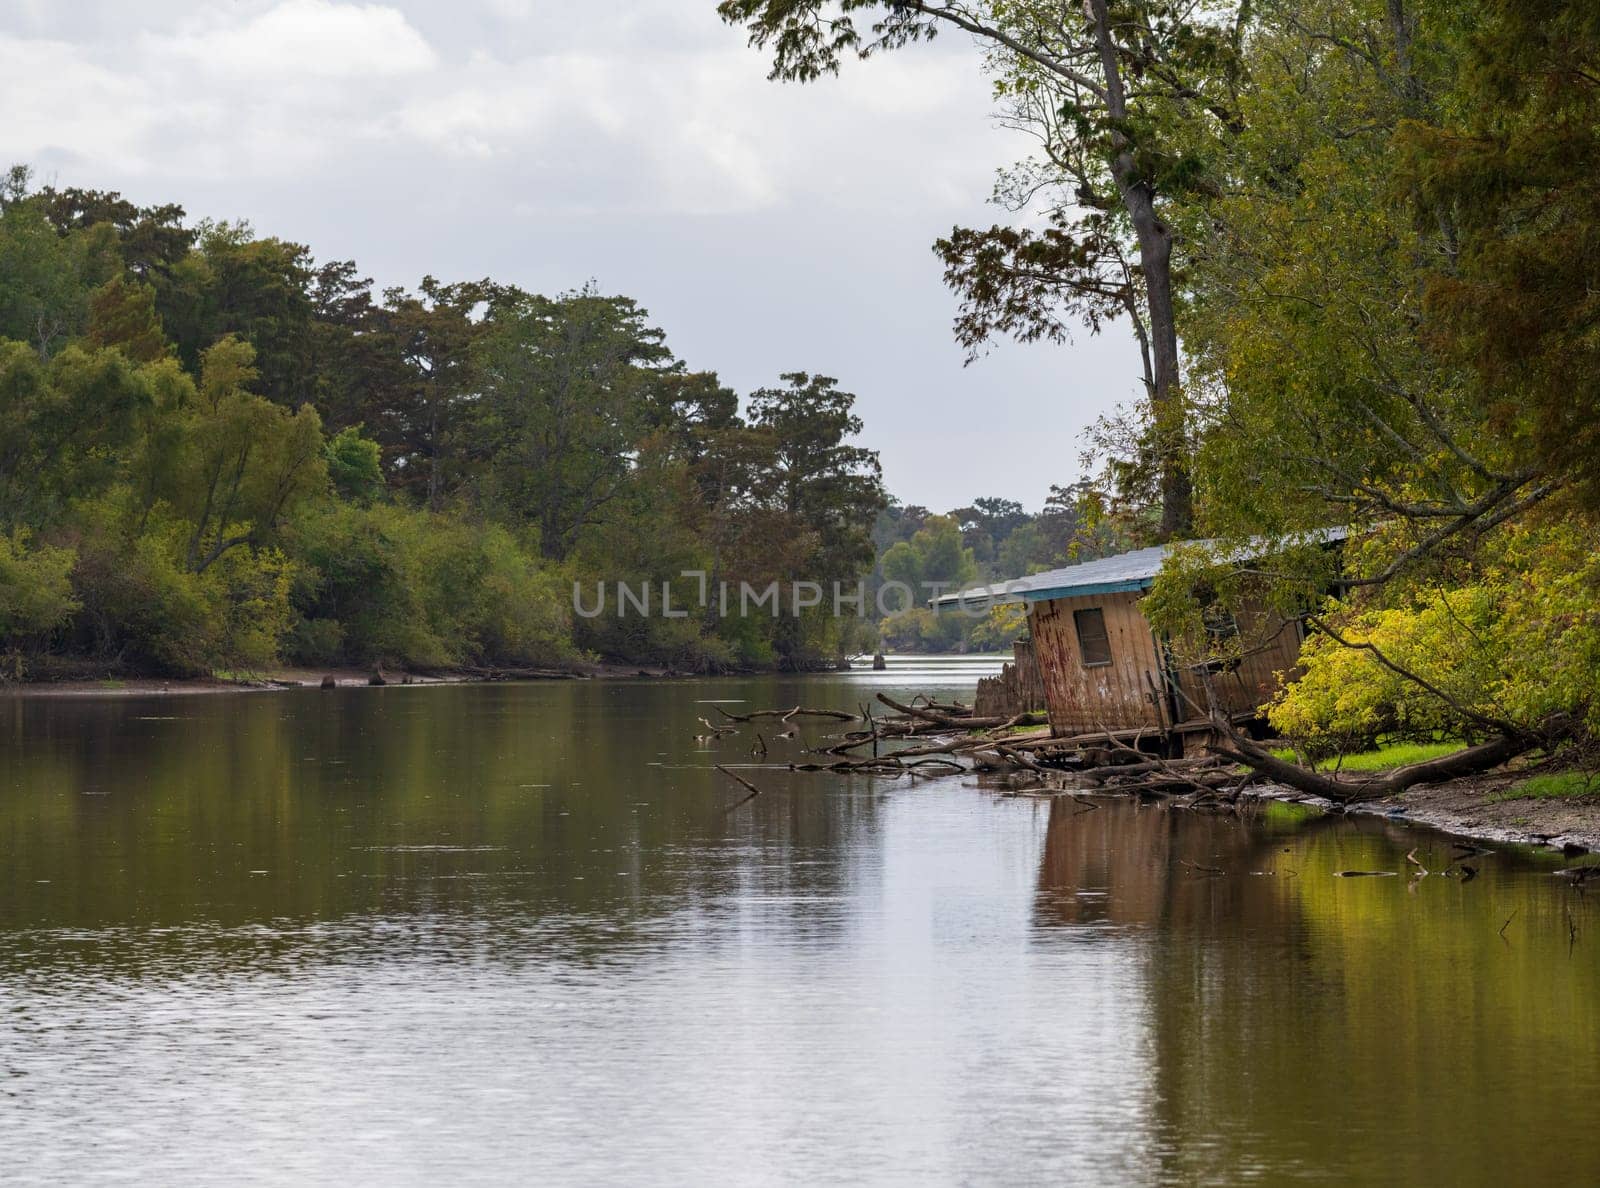 Abandoned cabin sinks into the water on the banks of Atchafalaya basin by steheap